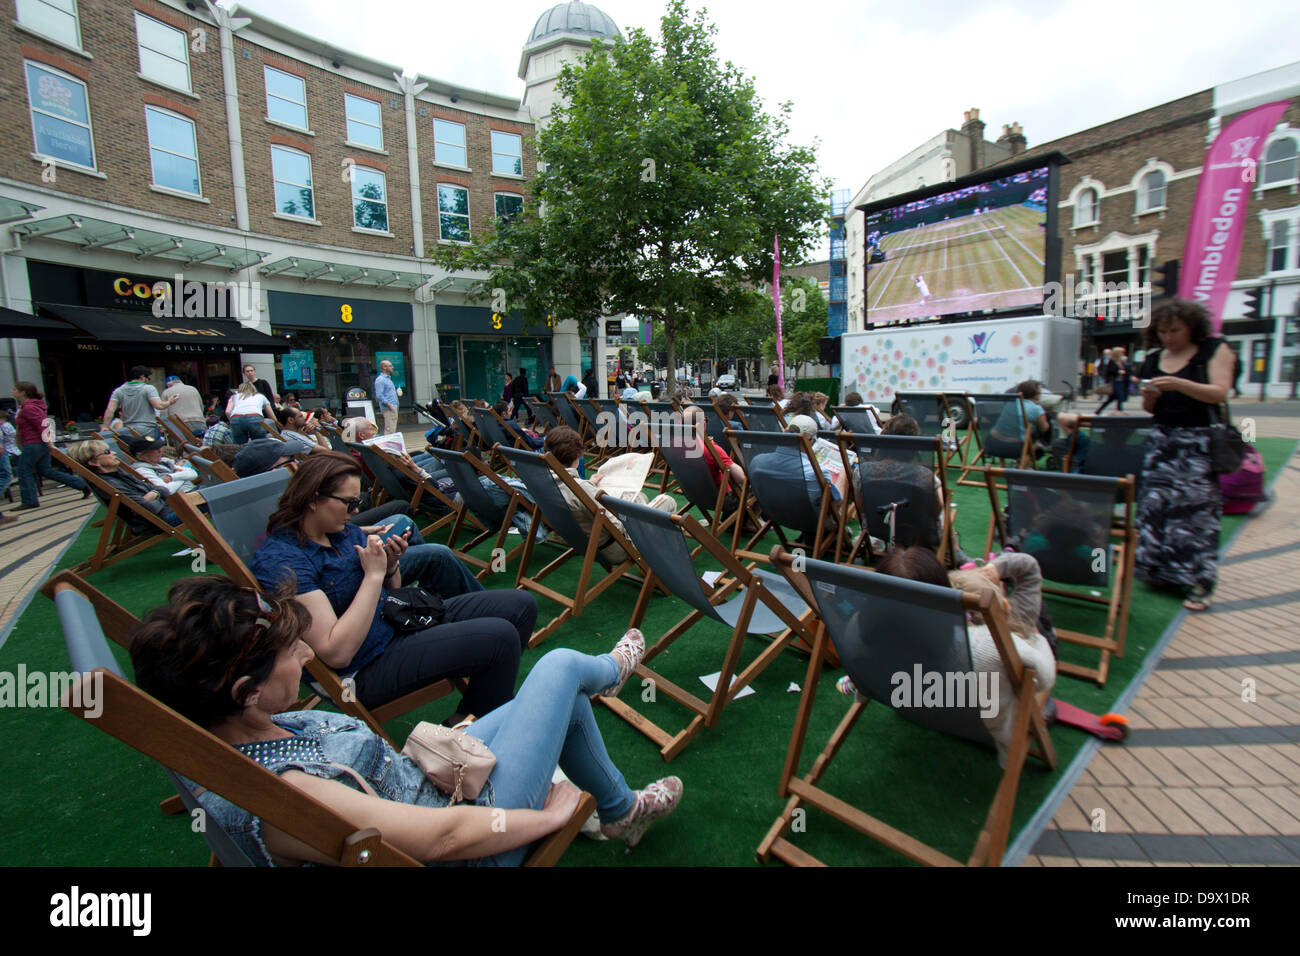 Wimbledon, London, UK. 27th June 2013. Shoppers and members of the public enjoy watching live matches broadcast on  a giant electronic screen in  Wimbledon town centre Credit:  amer ghazzal/Alamy Live News Stock Photo